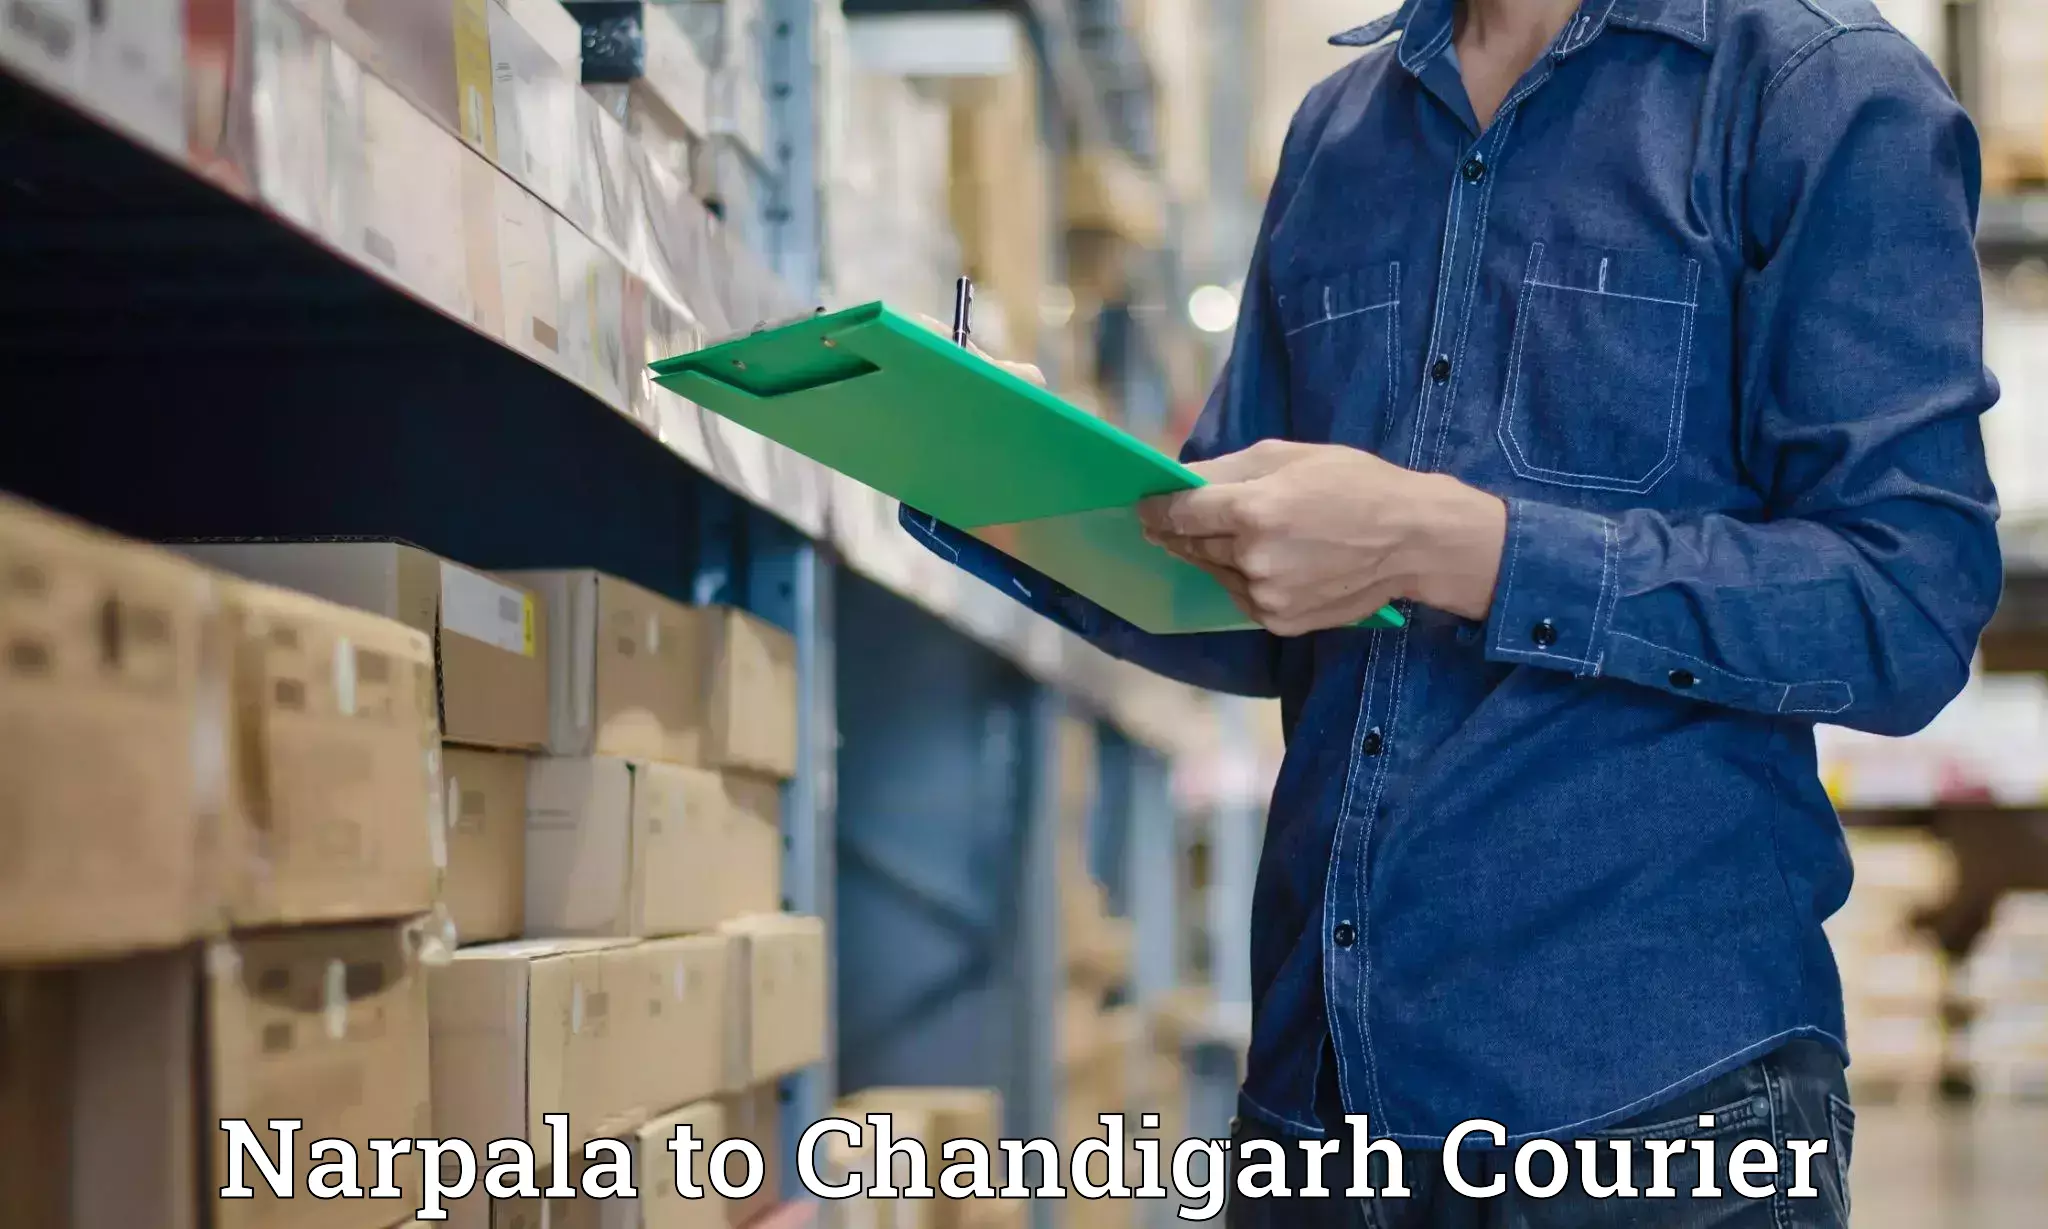 Courier insurance Narpala to Chandigarh